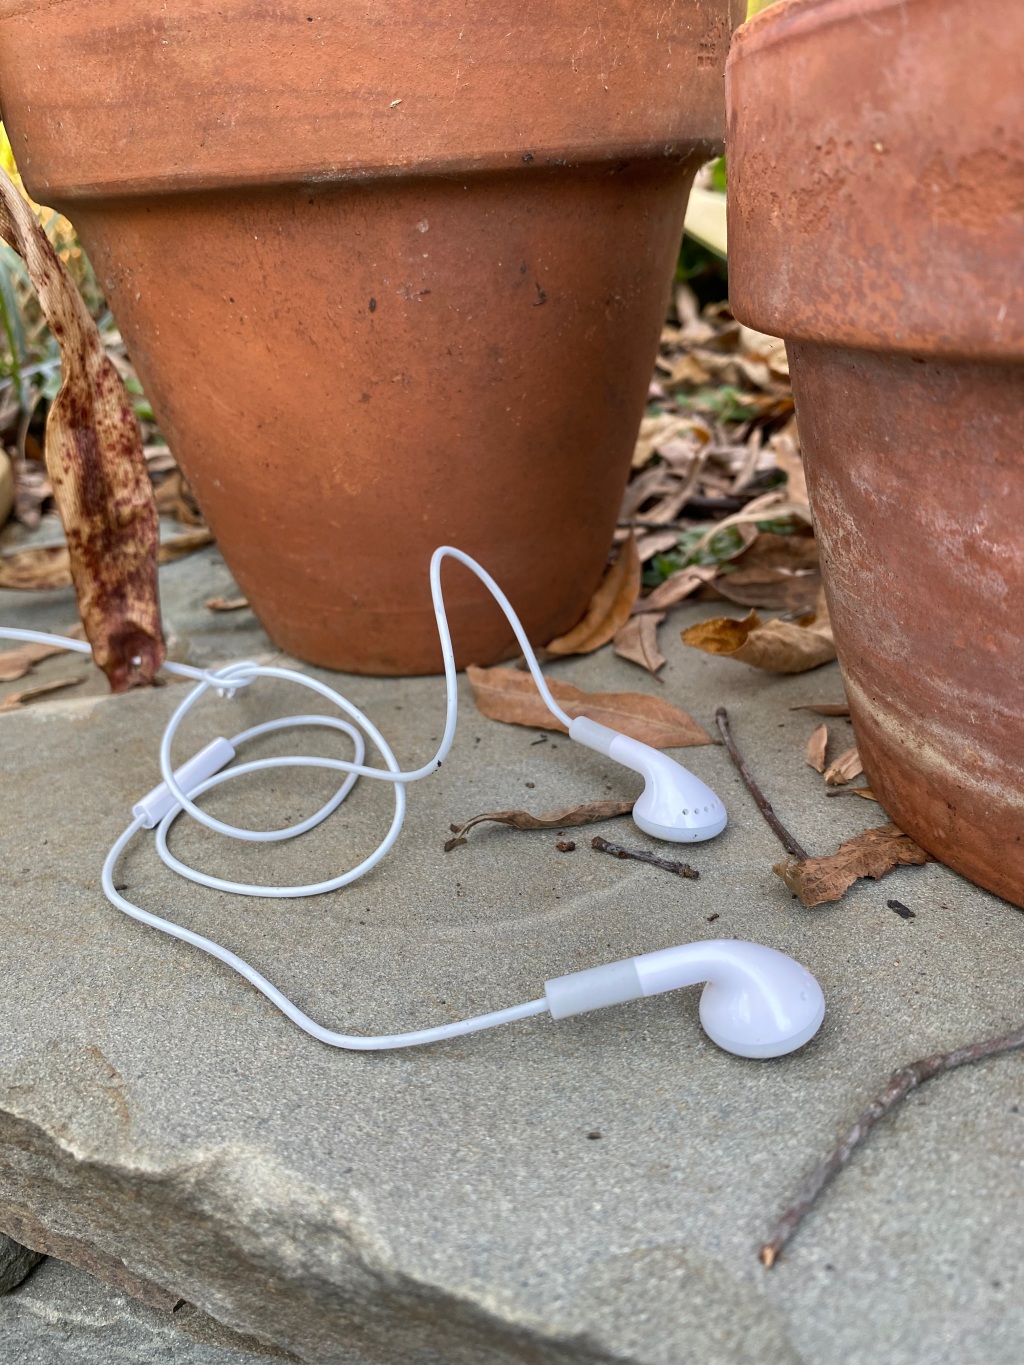 Looking for Gardening Podcasts